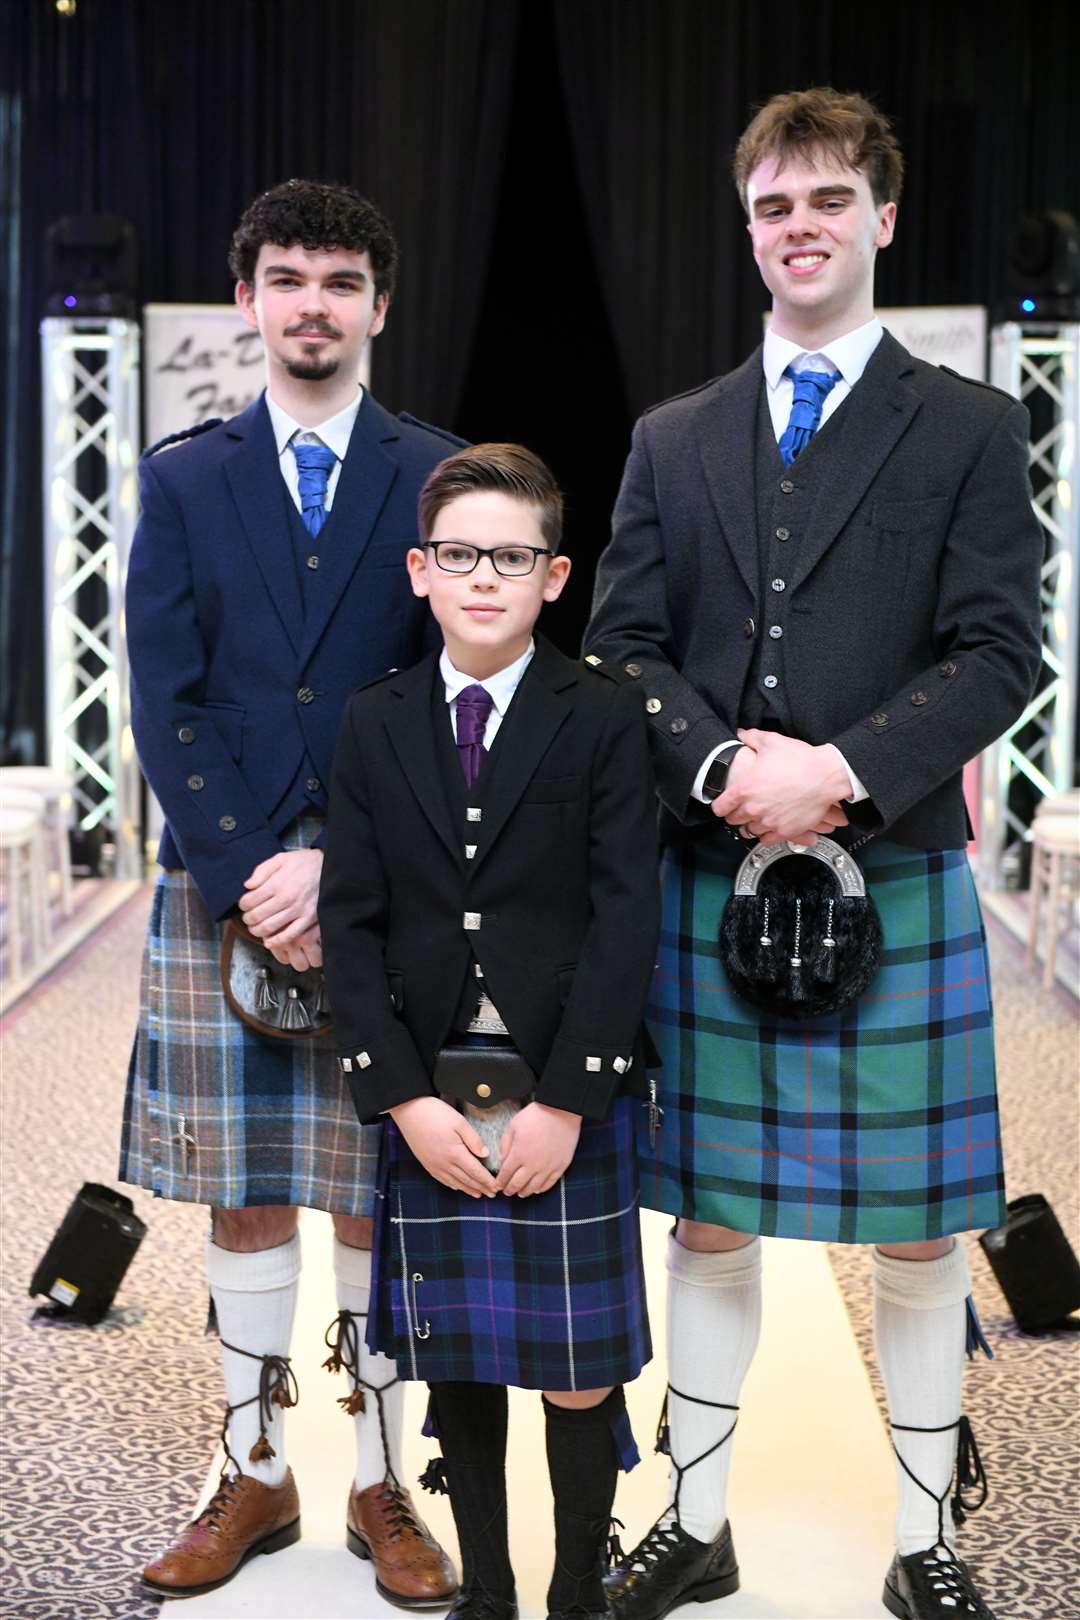 Groom and groomsmen choices from Ben Wyvis Kilts. Picture: James Mackenzie